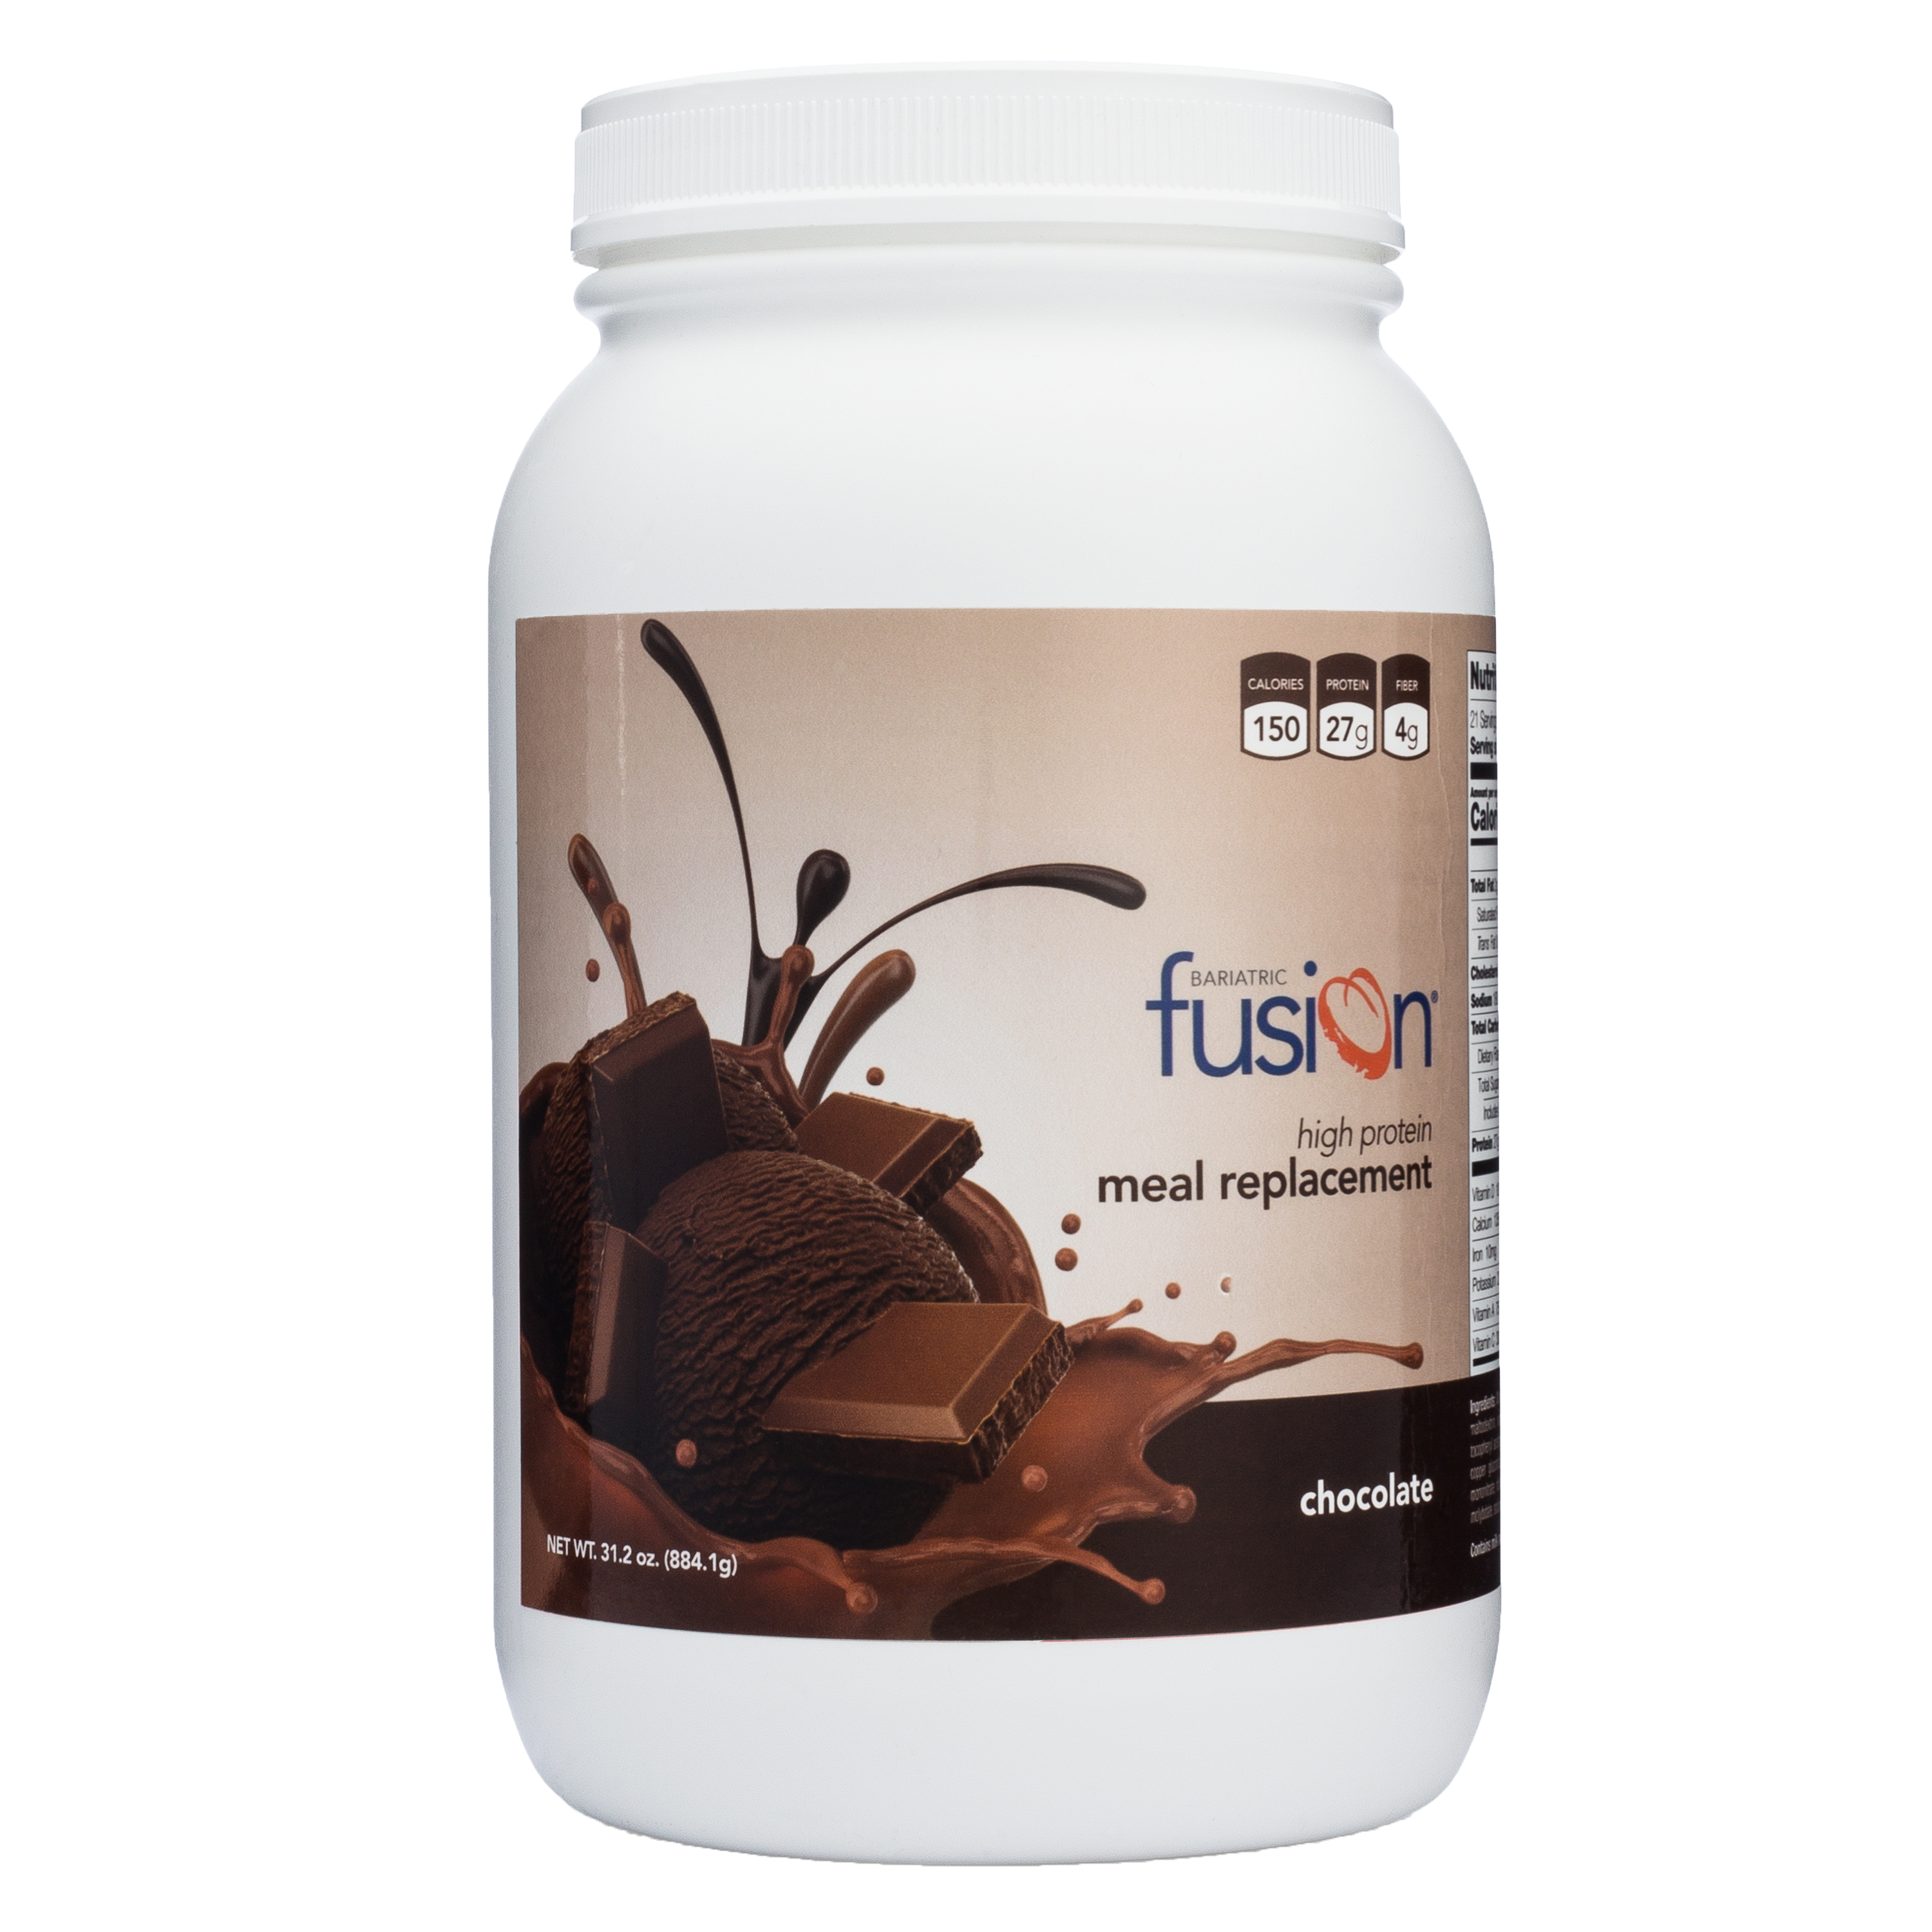 Chocolate High Protein Meal Replacement - Bariatric Fusion